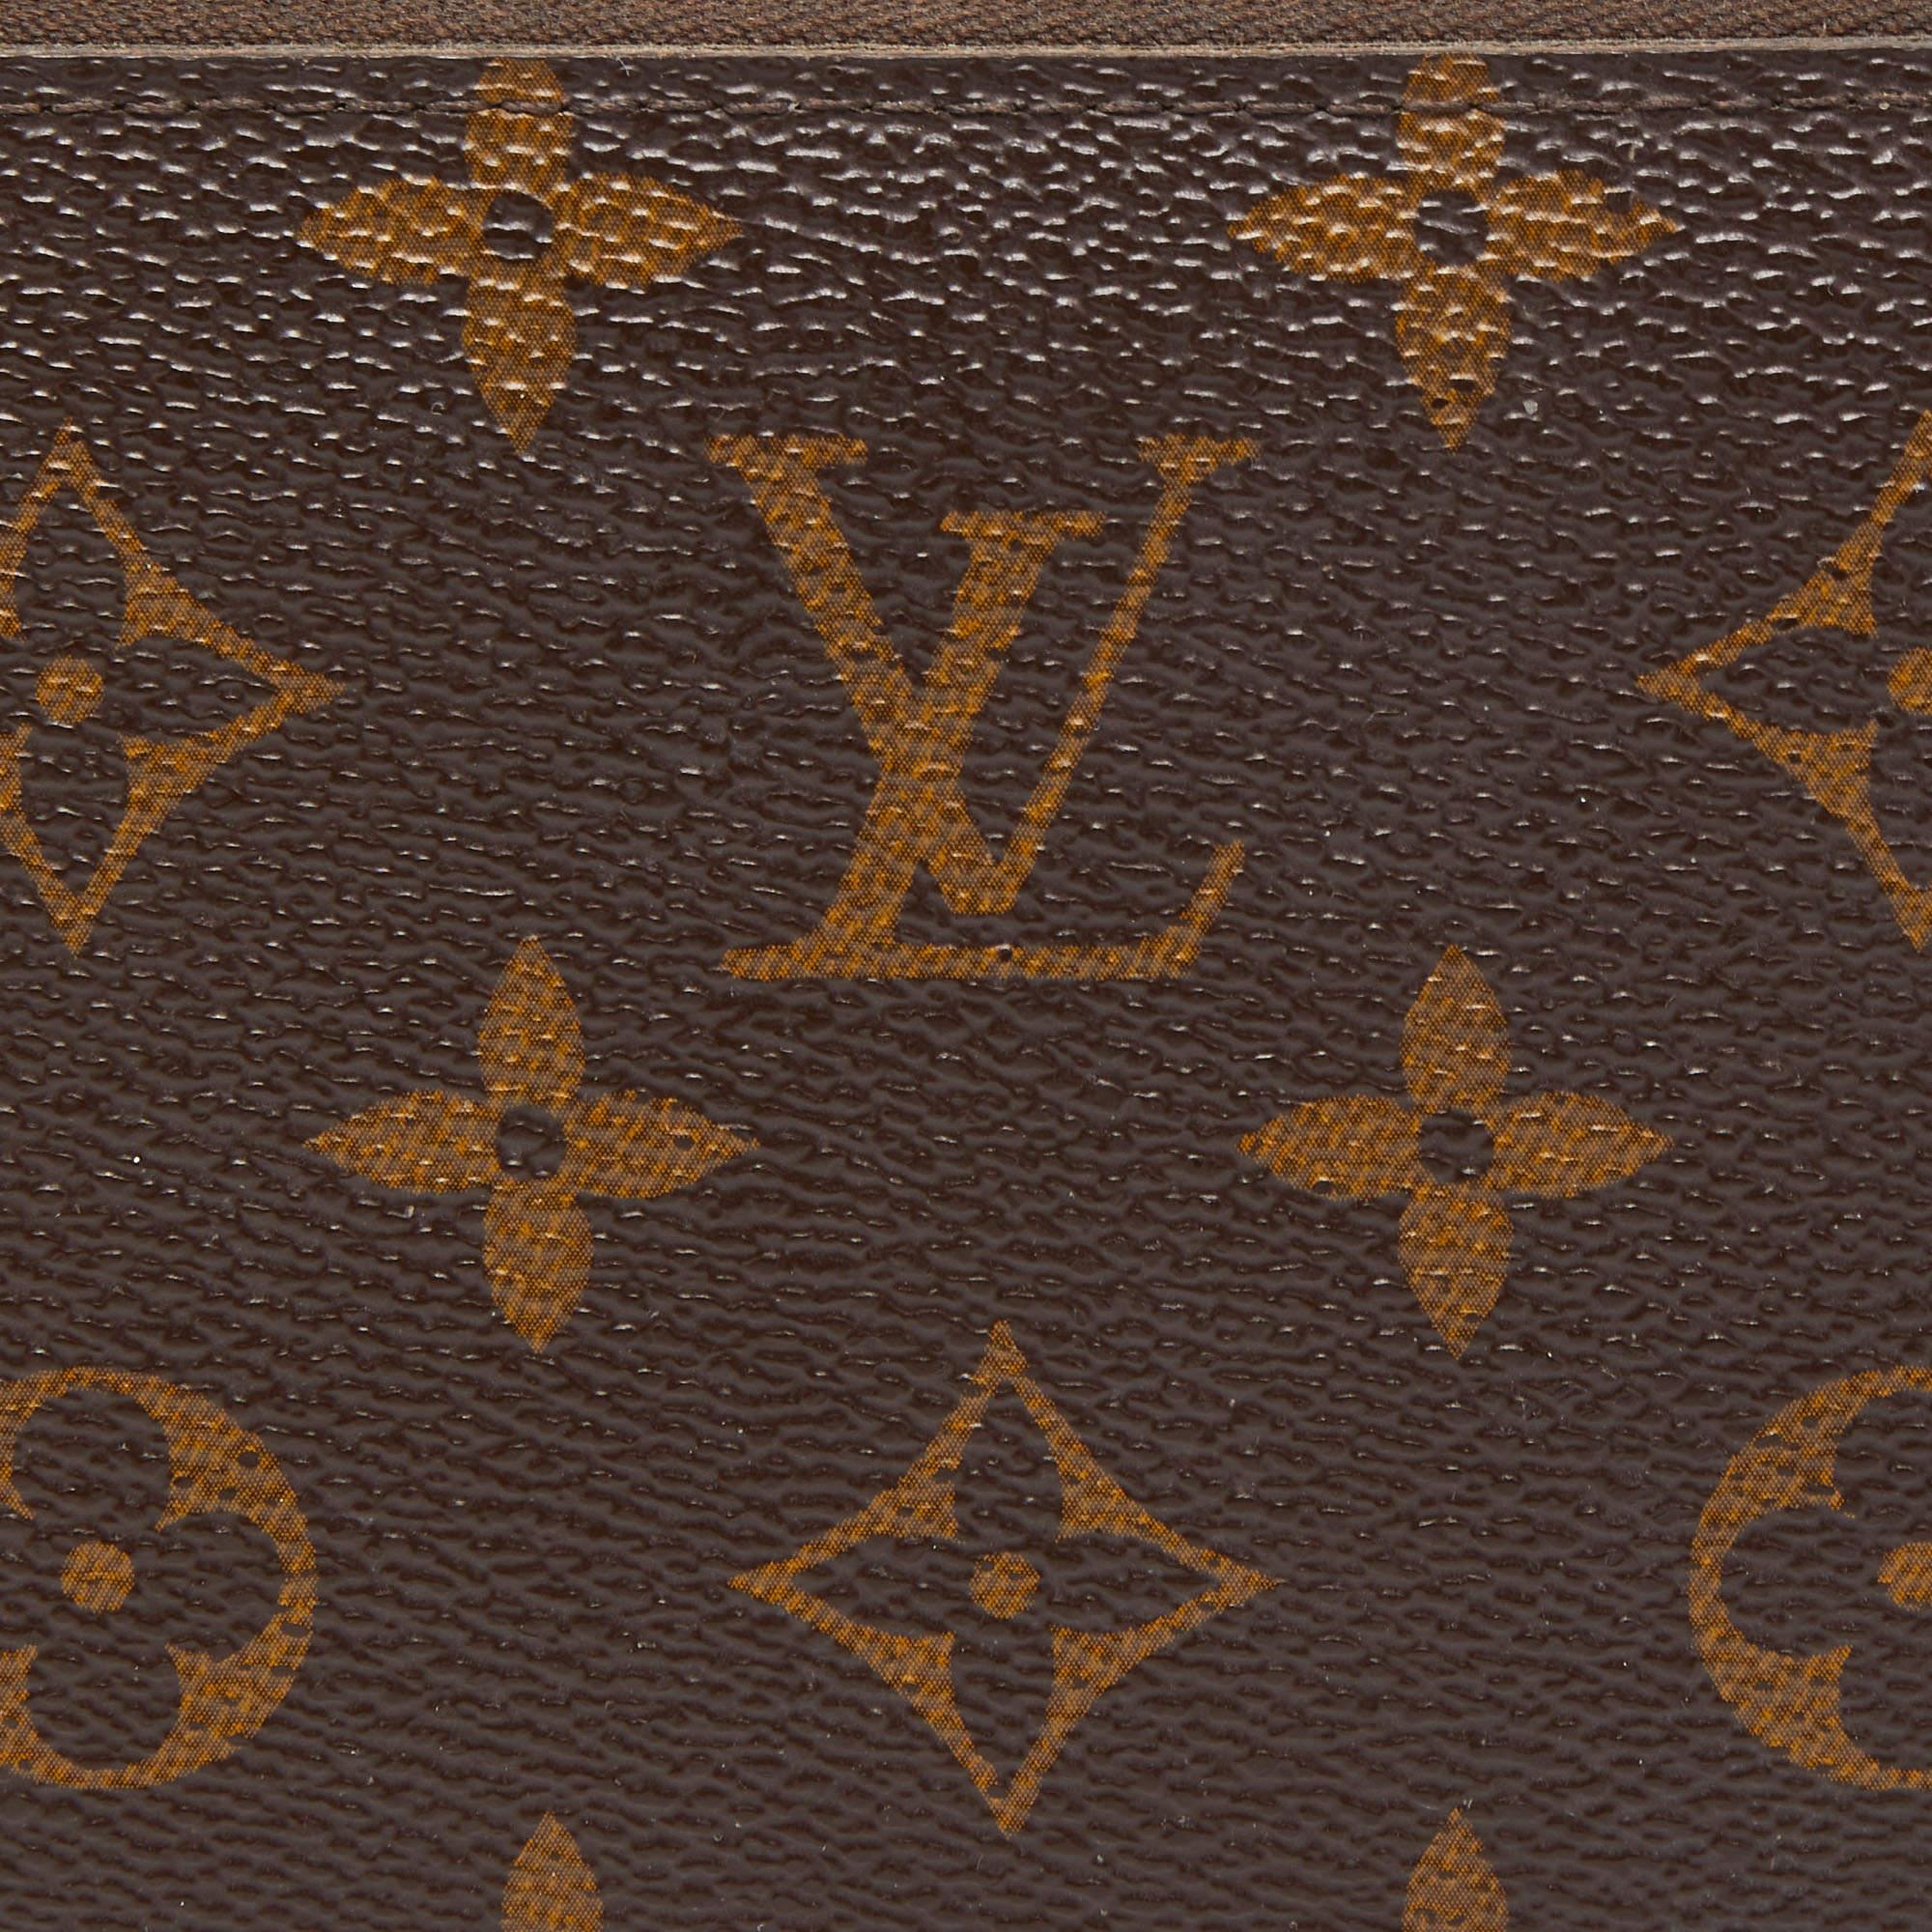 With a rich heritage and meticulous workmanship, each creation of Louis Vuitton is sure to impress you with its notable features. This Zippy wallet is conveniently designed for everyday use. Crafted from Monogram Canvas, it is paired with a